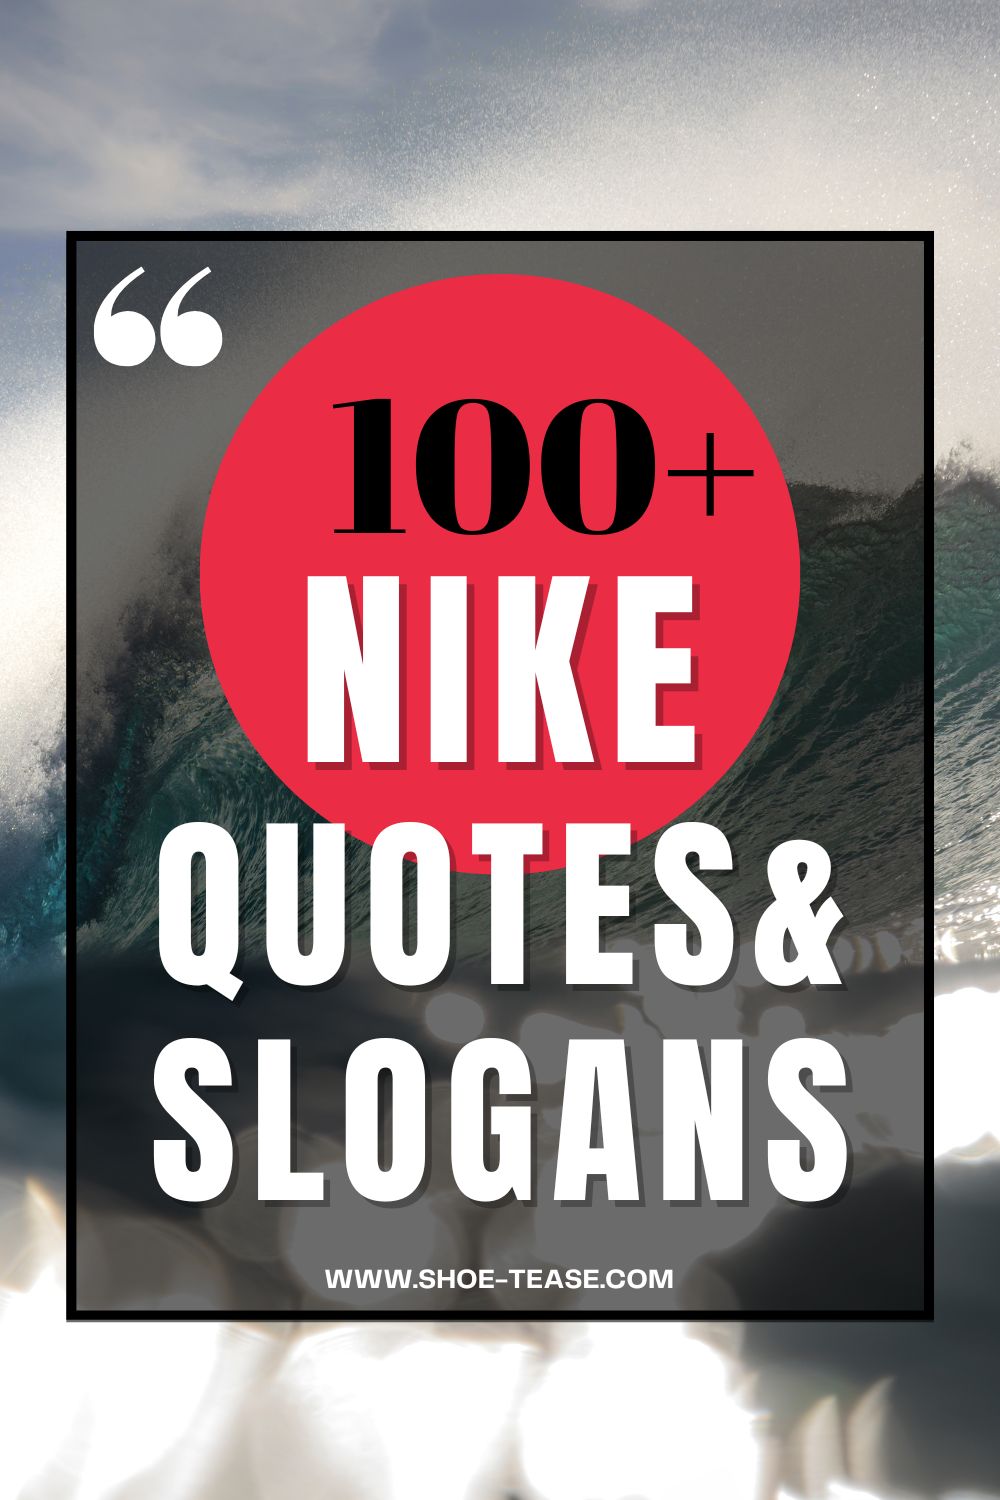 Tacón Machu Picchu Grabar Over 100 Best Nike Quotes, Motivational Slogans and Sayings about Nike